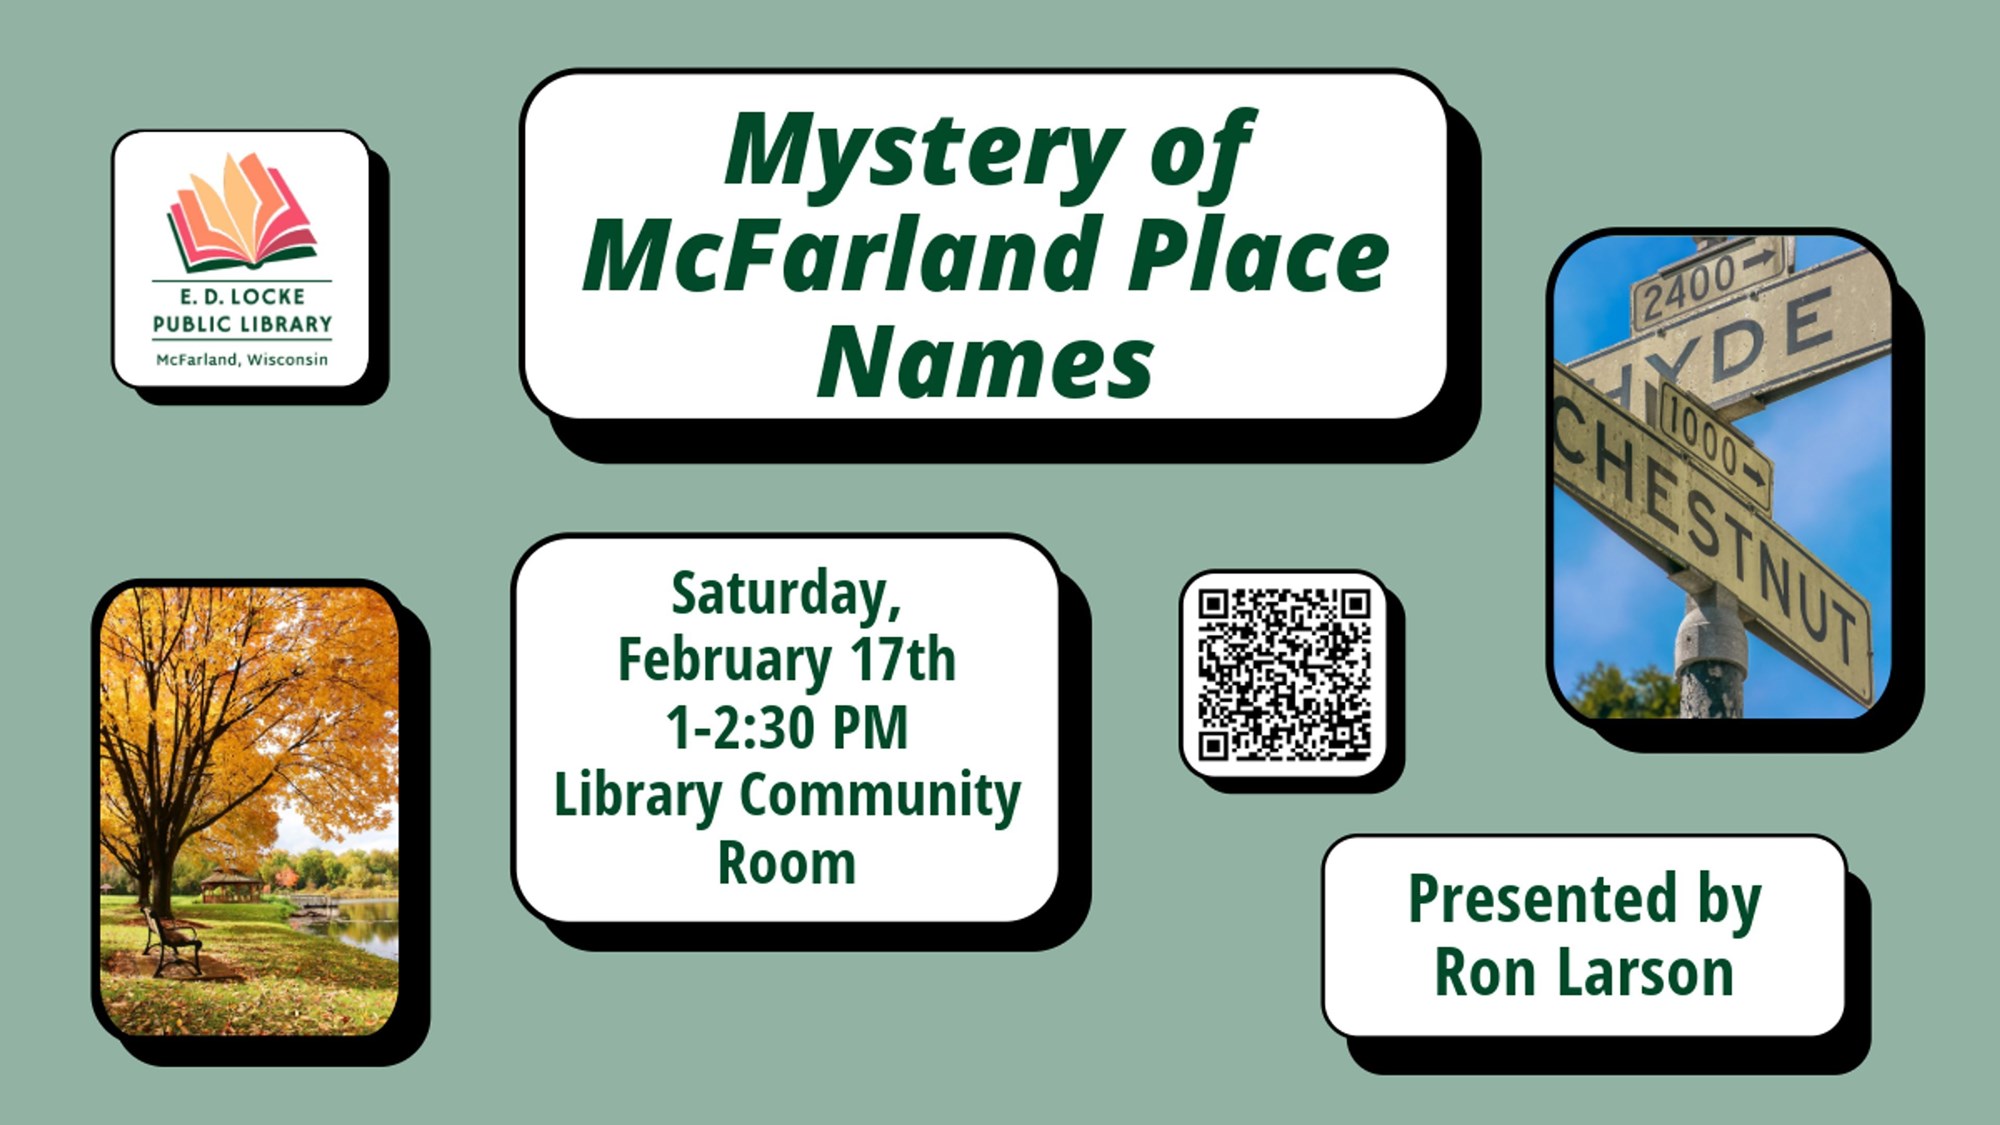 Mystery of McFarland Place Names Saturday, February 17th 1-2:30 PM Library Community Room. Presented by Ron Larson.